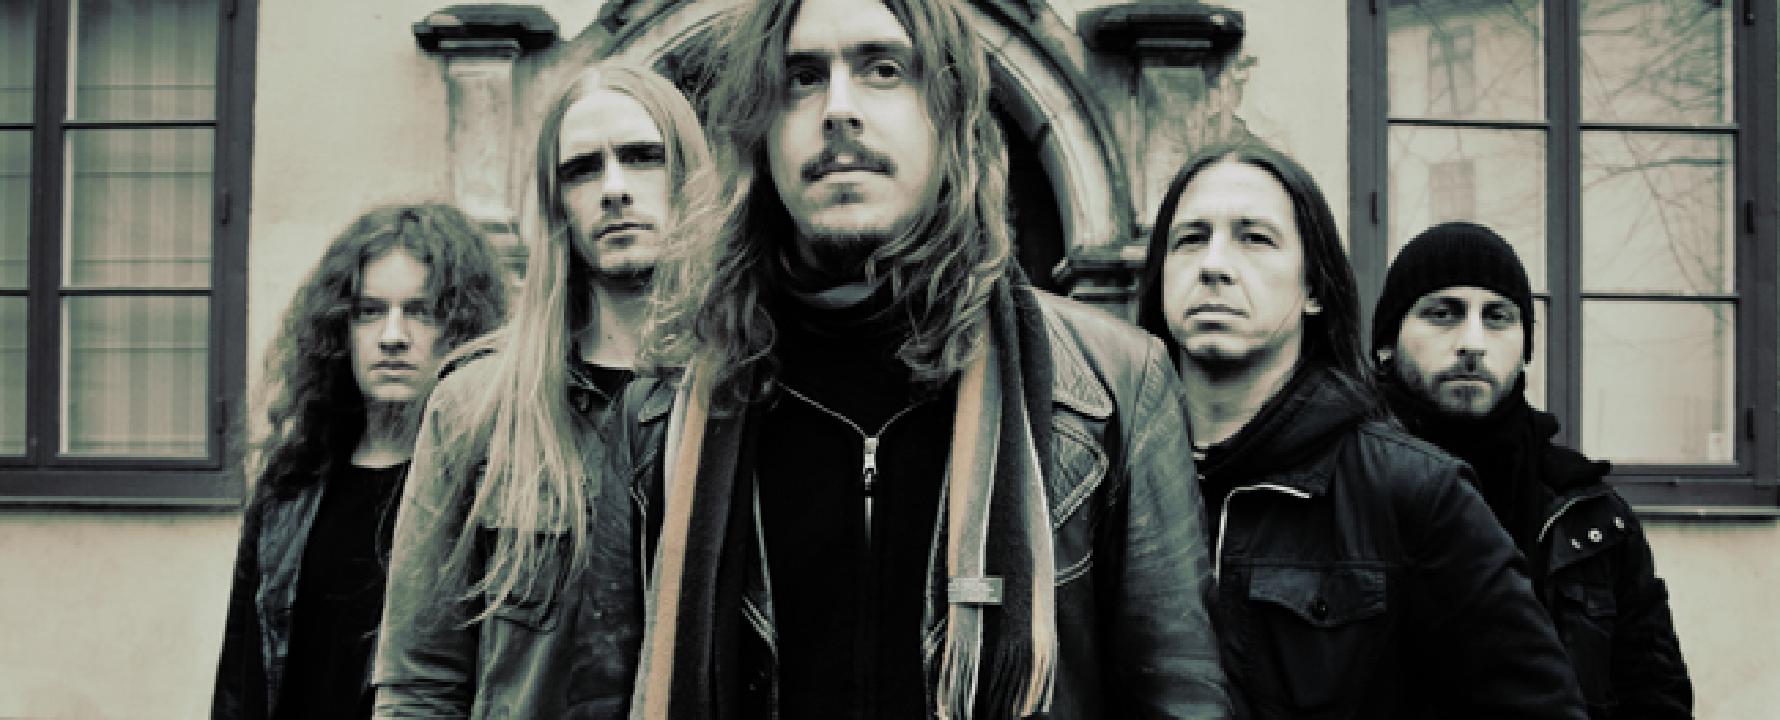 Promotional photograph of Opeth.